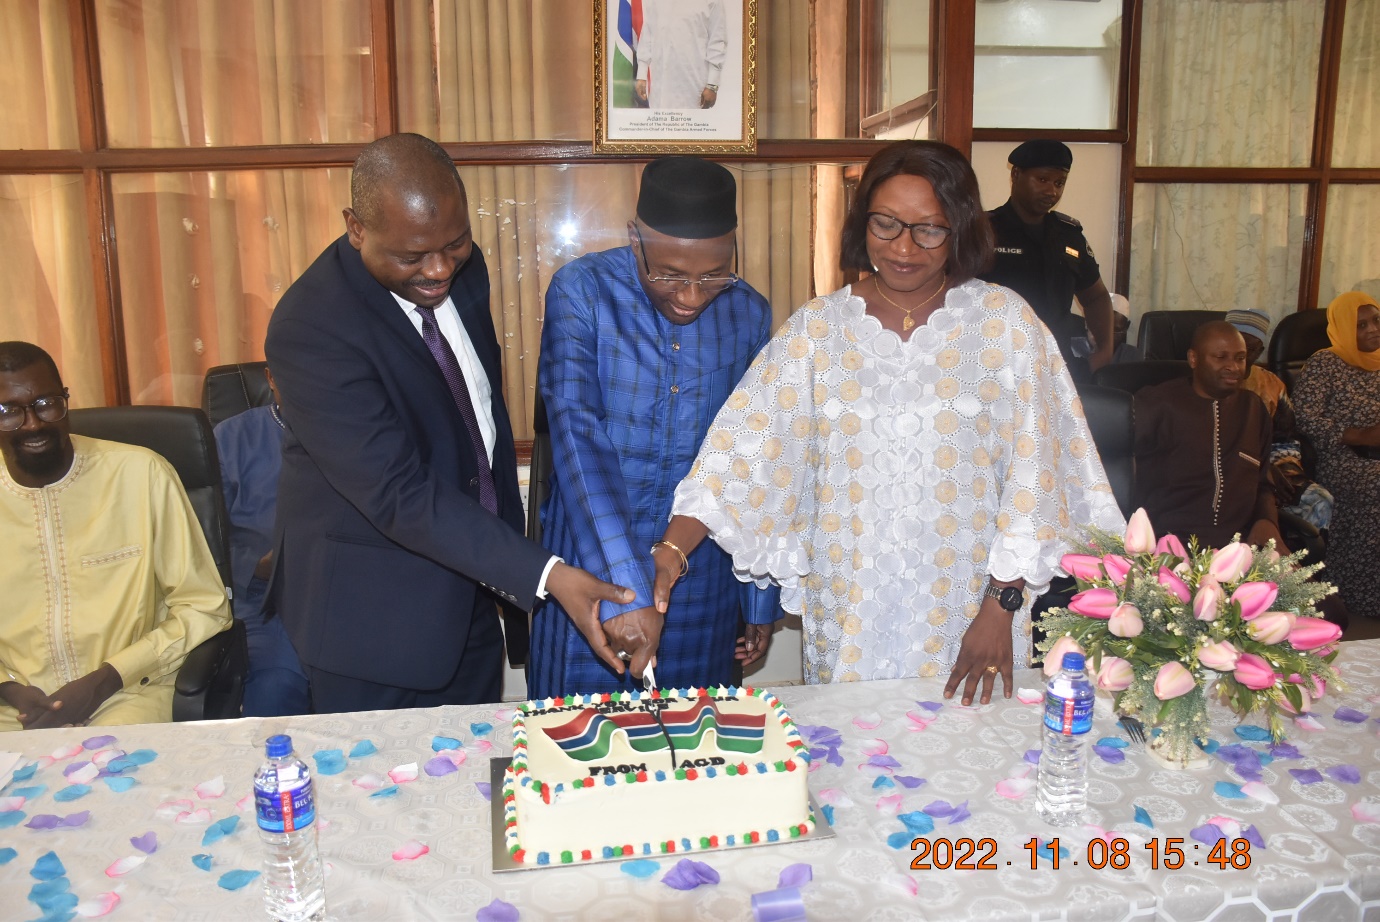 THE ACCOUNTANT GENERALâ€™S DEPARTMENT BADE FAREWELL TO THEIR FORMER BOSS